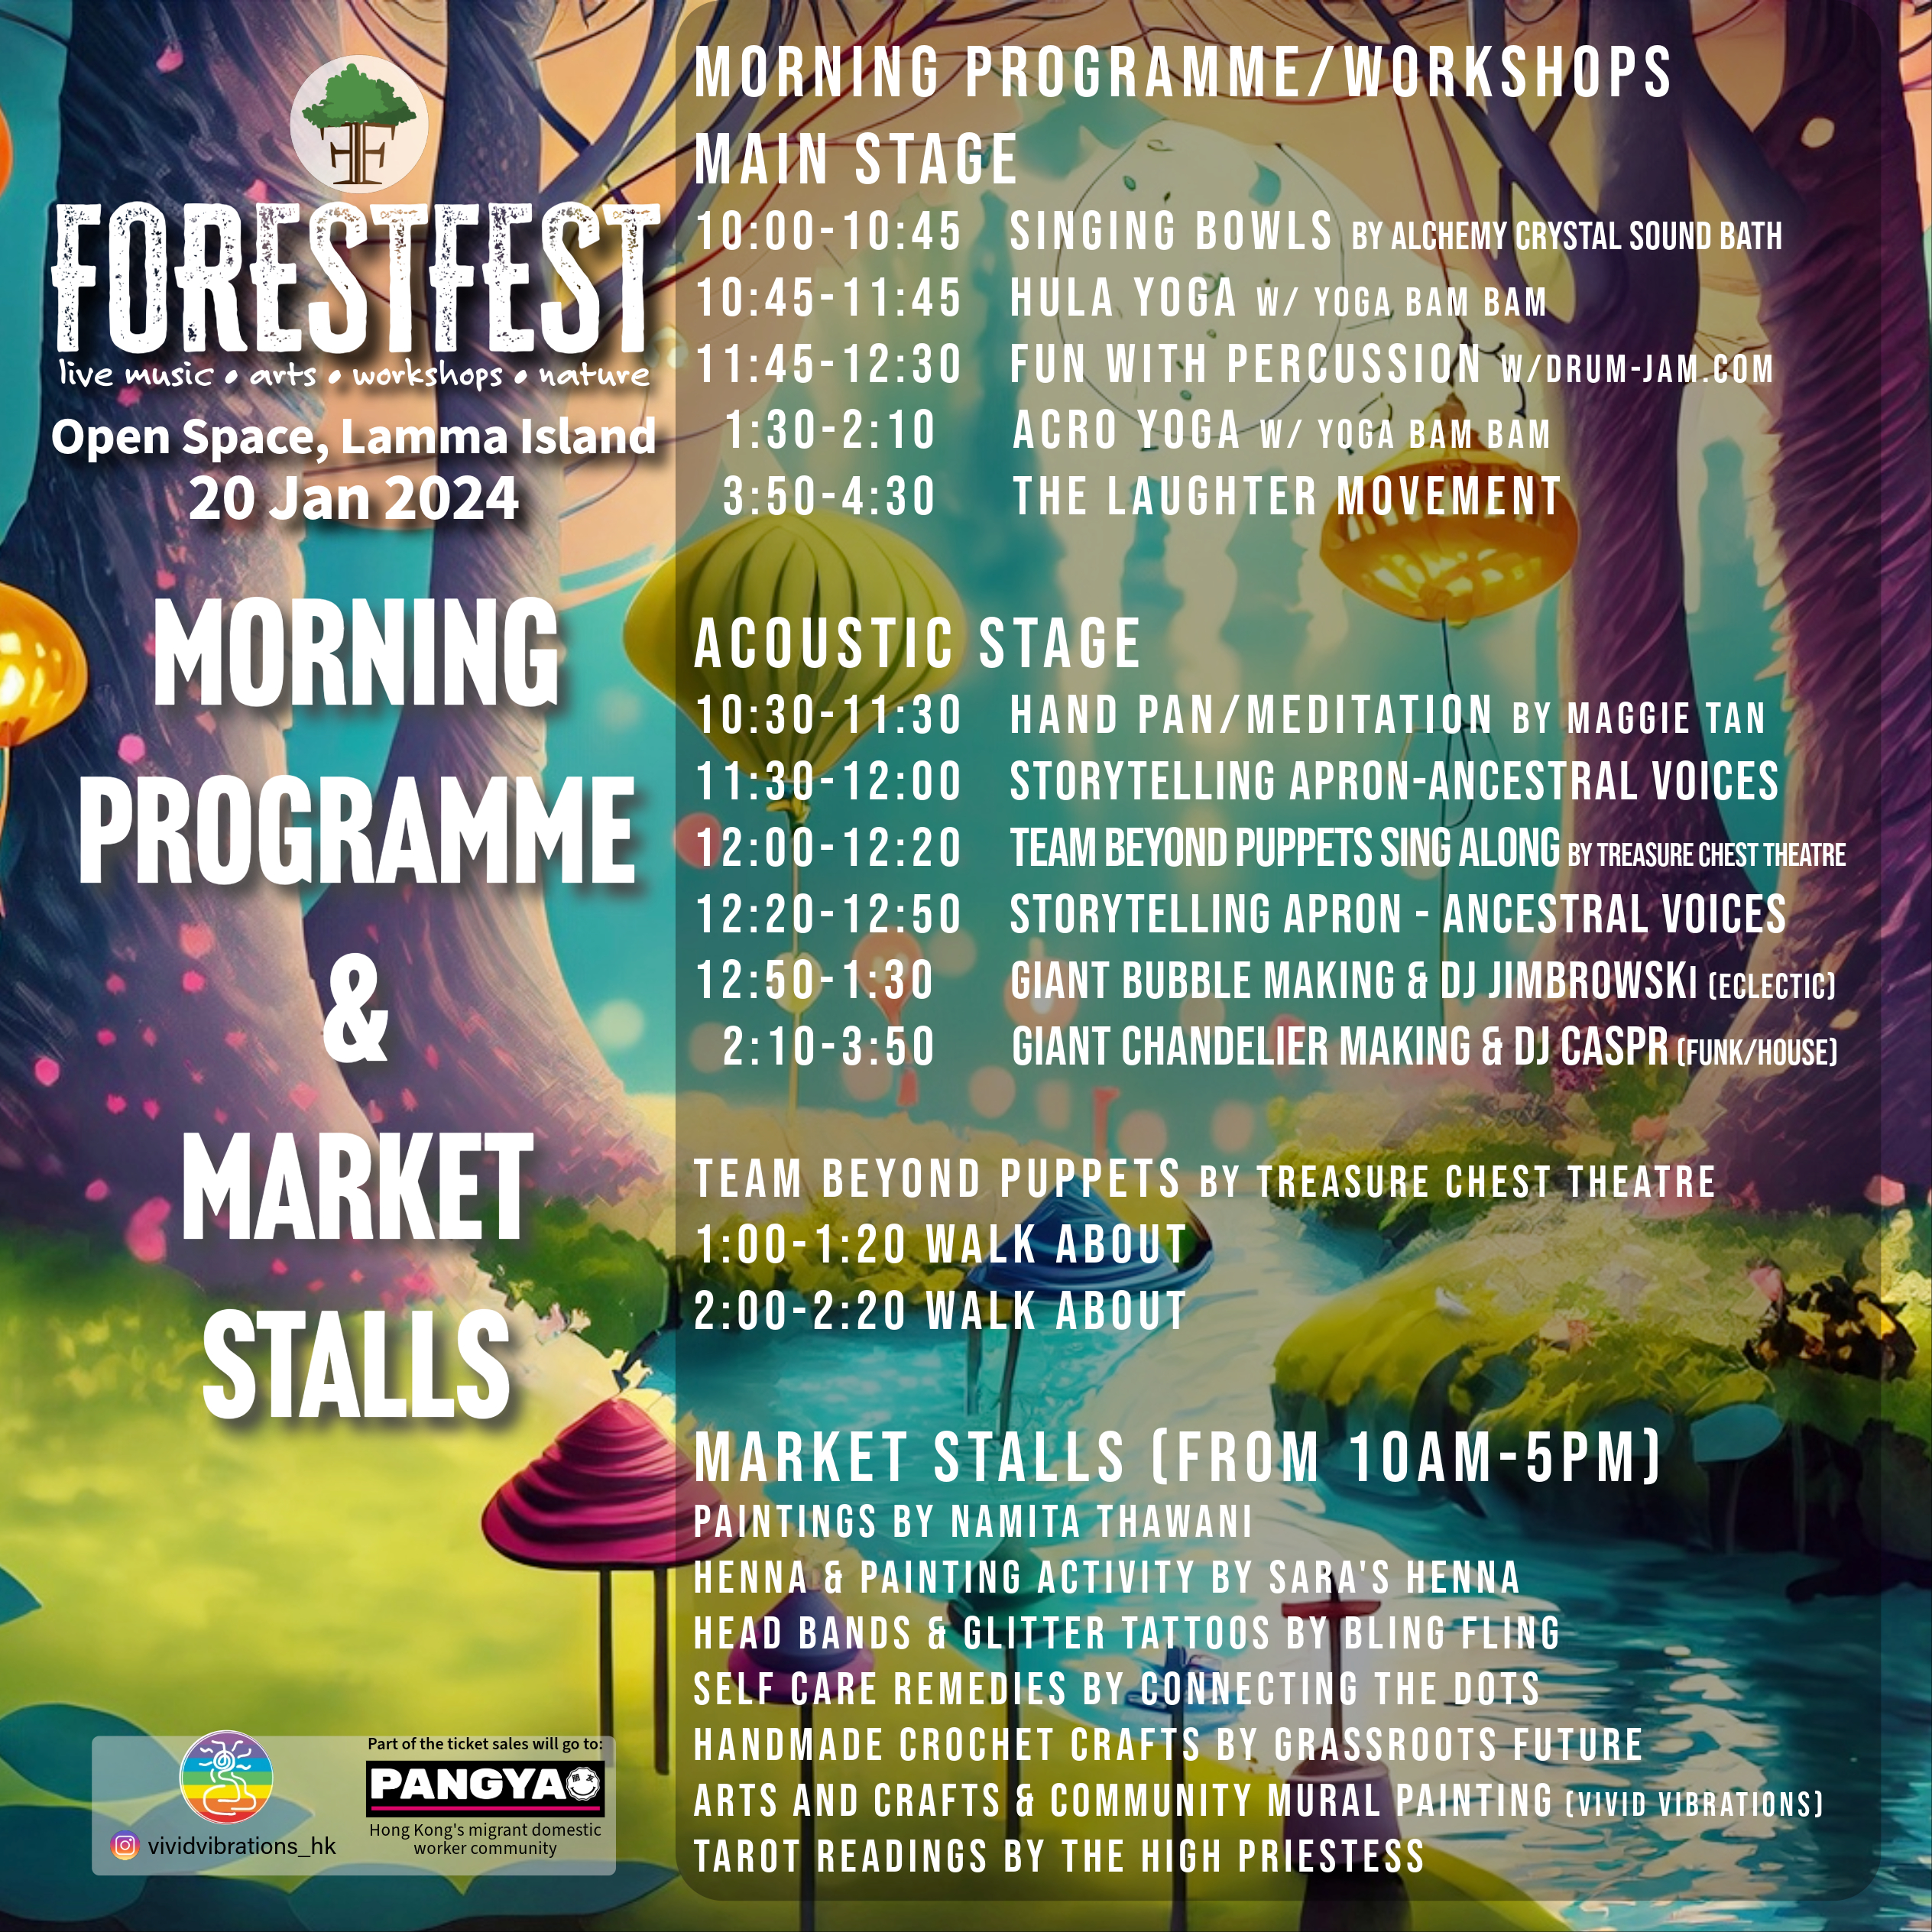 forestfest morning programme and market stalls lineup